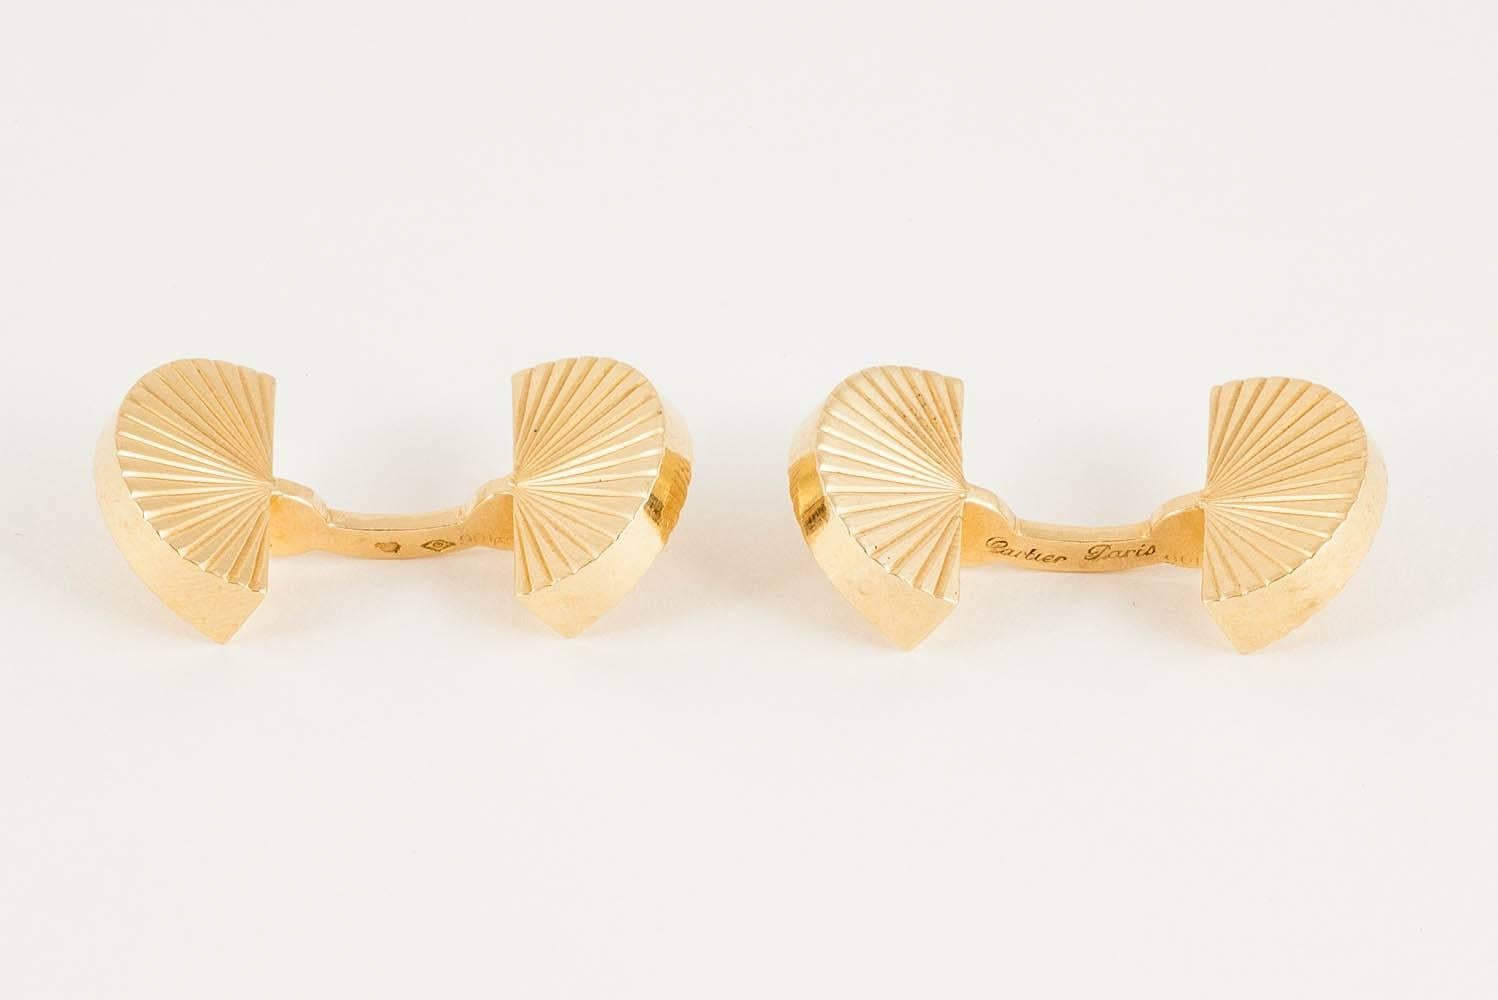 A fine pair of heavy solid double sided cufflinks in 18 karat yellow gold. In the shape of a fan with a stiff connecting bar.  Signed by Cartier of Paris and fitted in original Cartier case.
Fan measures 14mm wide.
1950’s Vintage piece in the